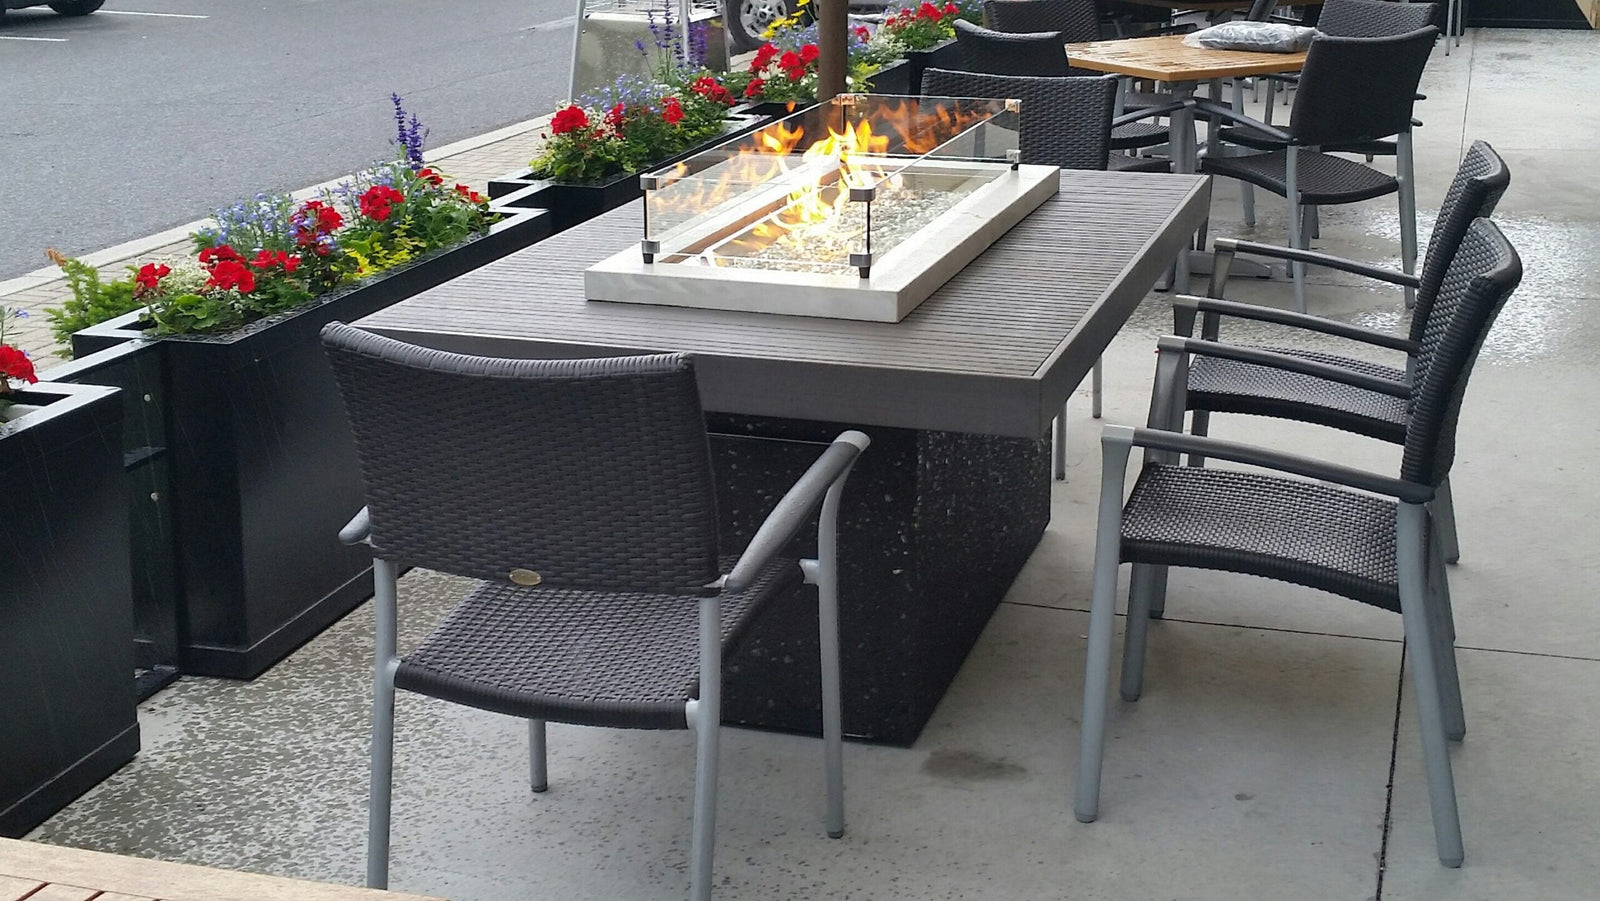 The #1 Way To Expand Your Restaurant's Outdoor Dining Experience